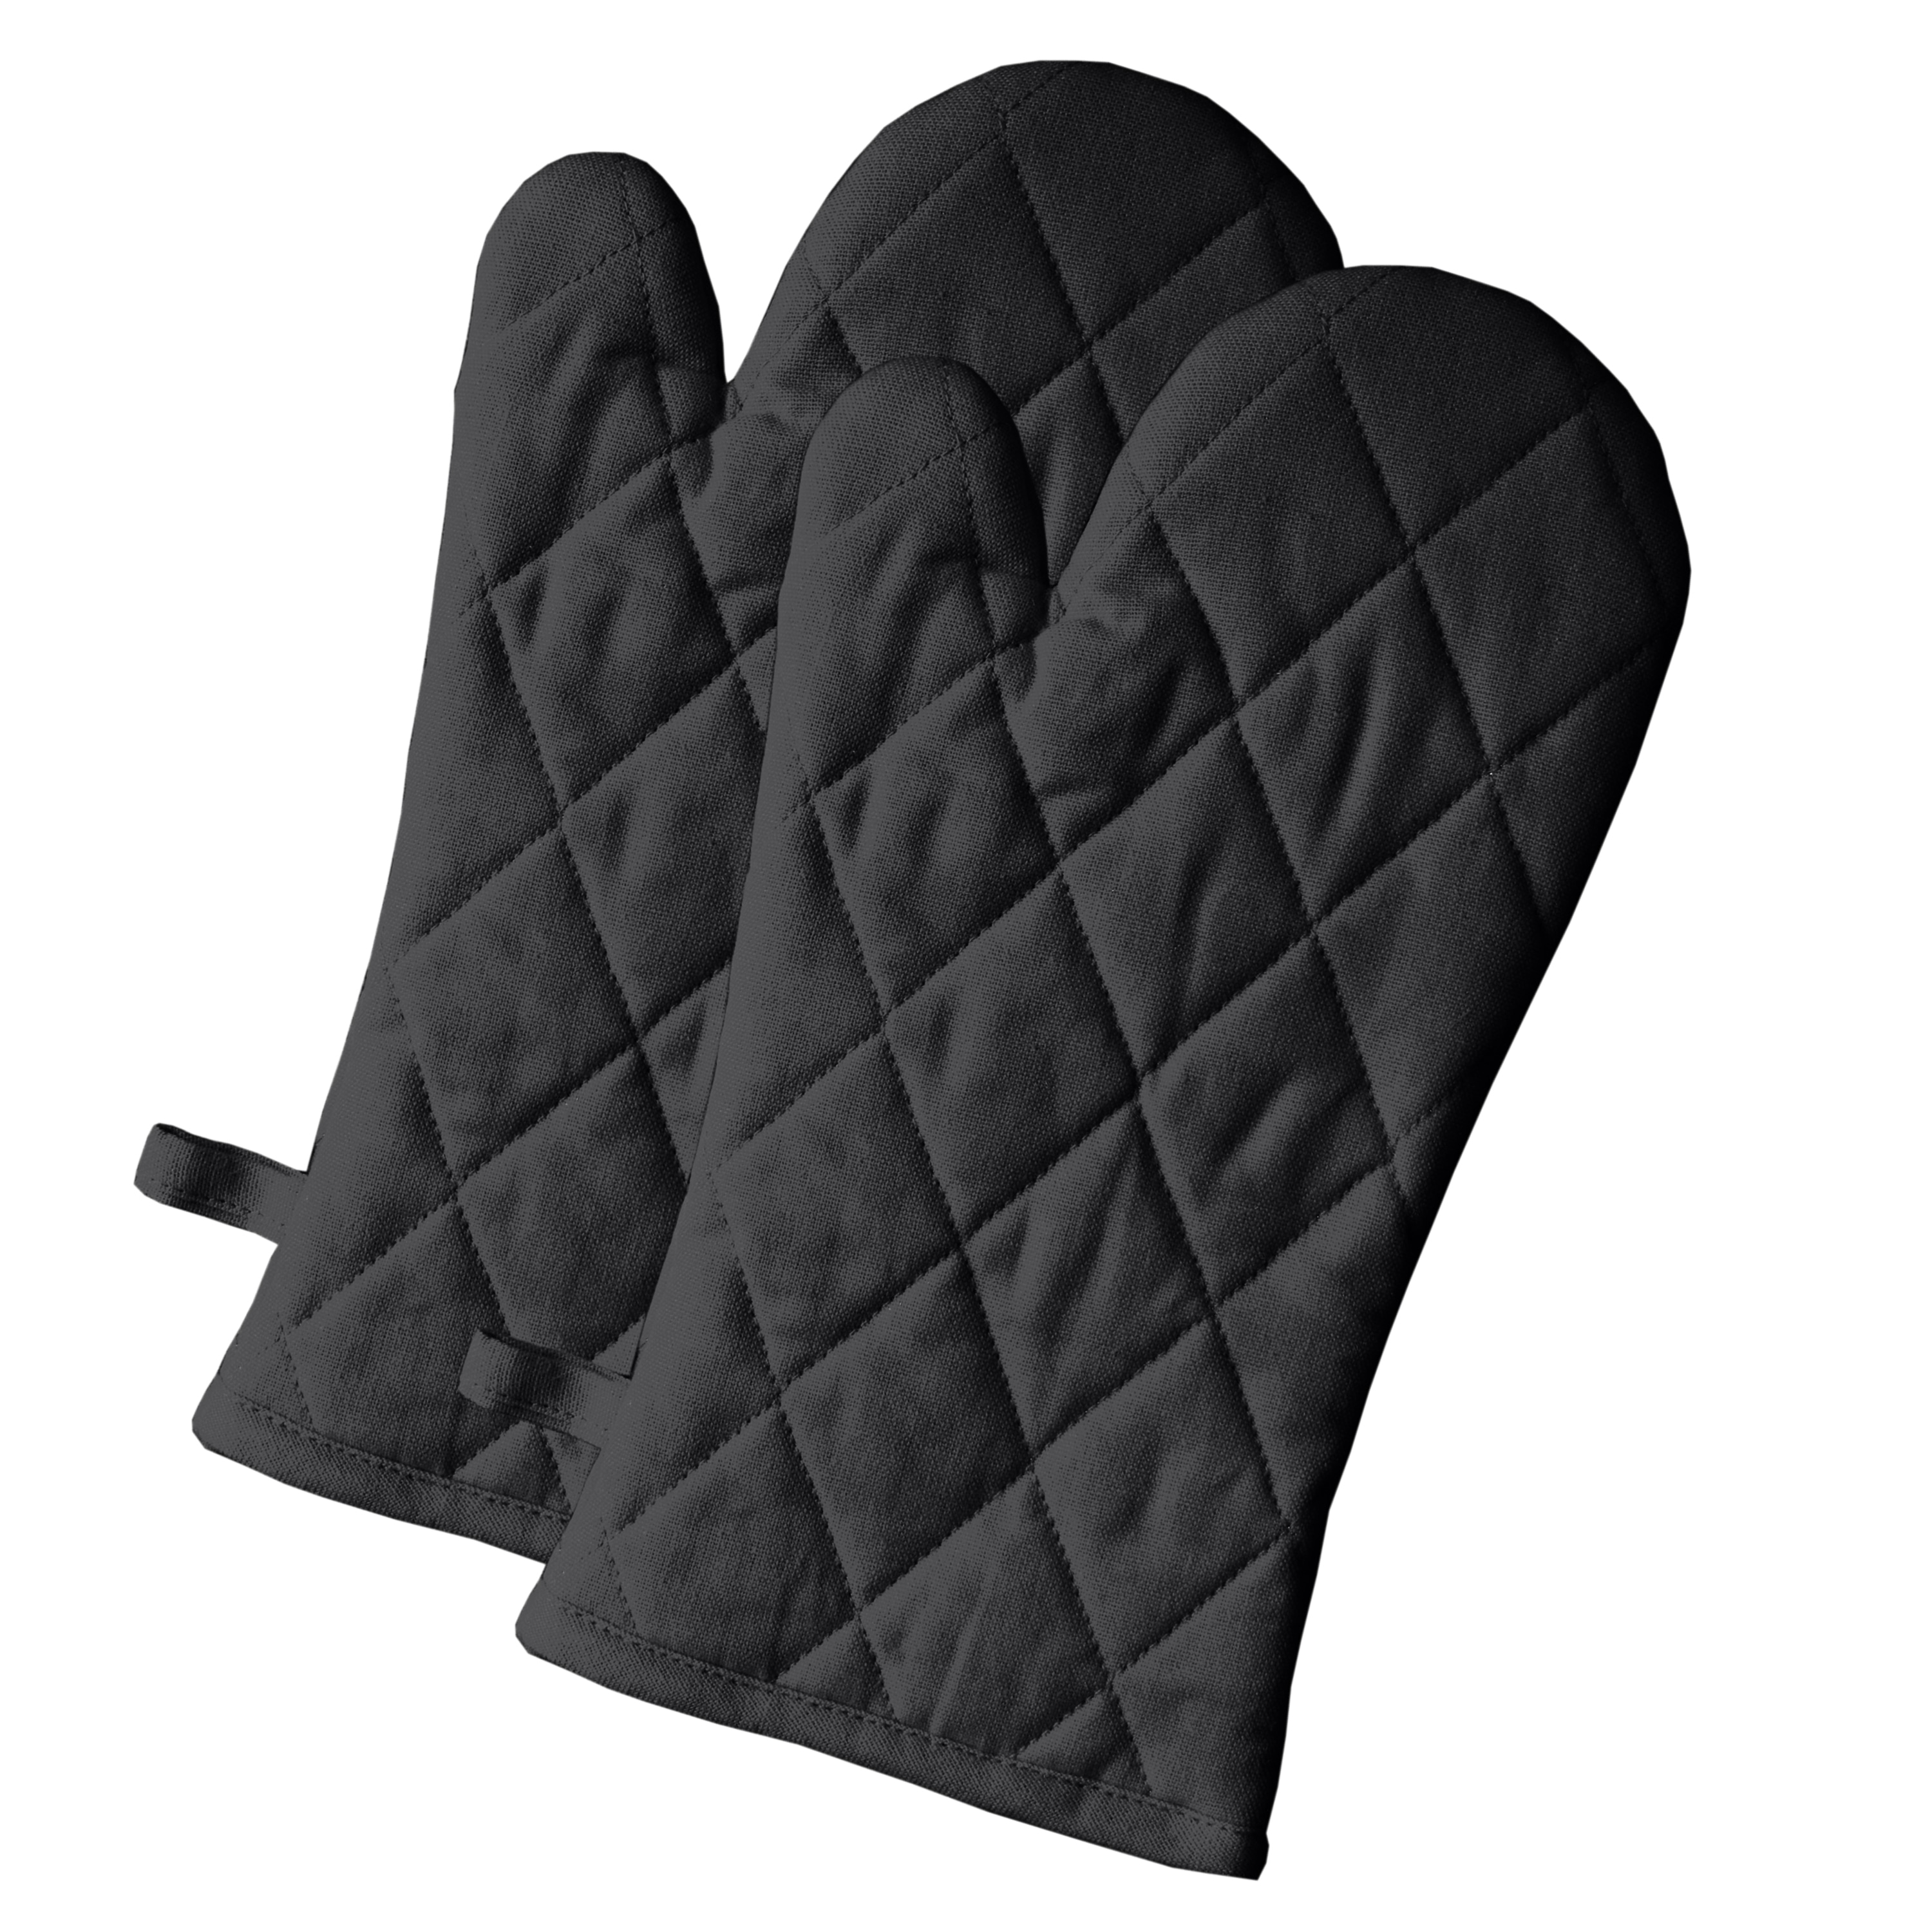 Living My Blessed Life - oven mitt - pot holder – It's A Black Thang.com